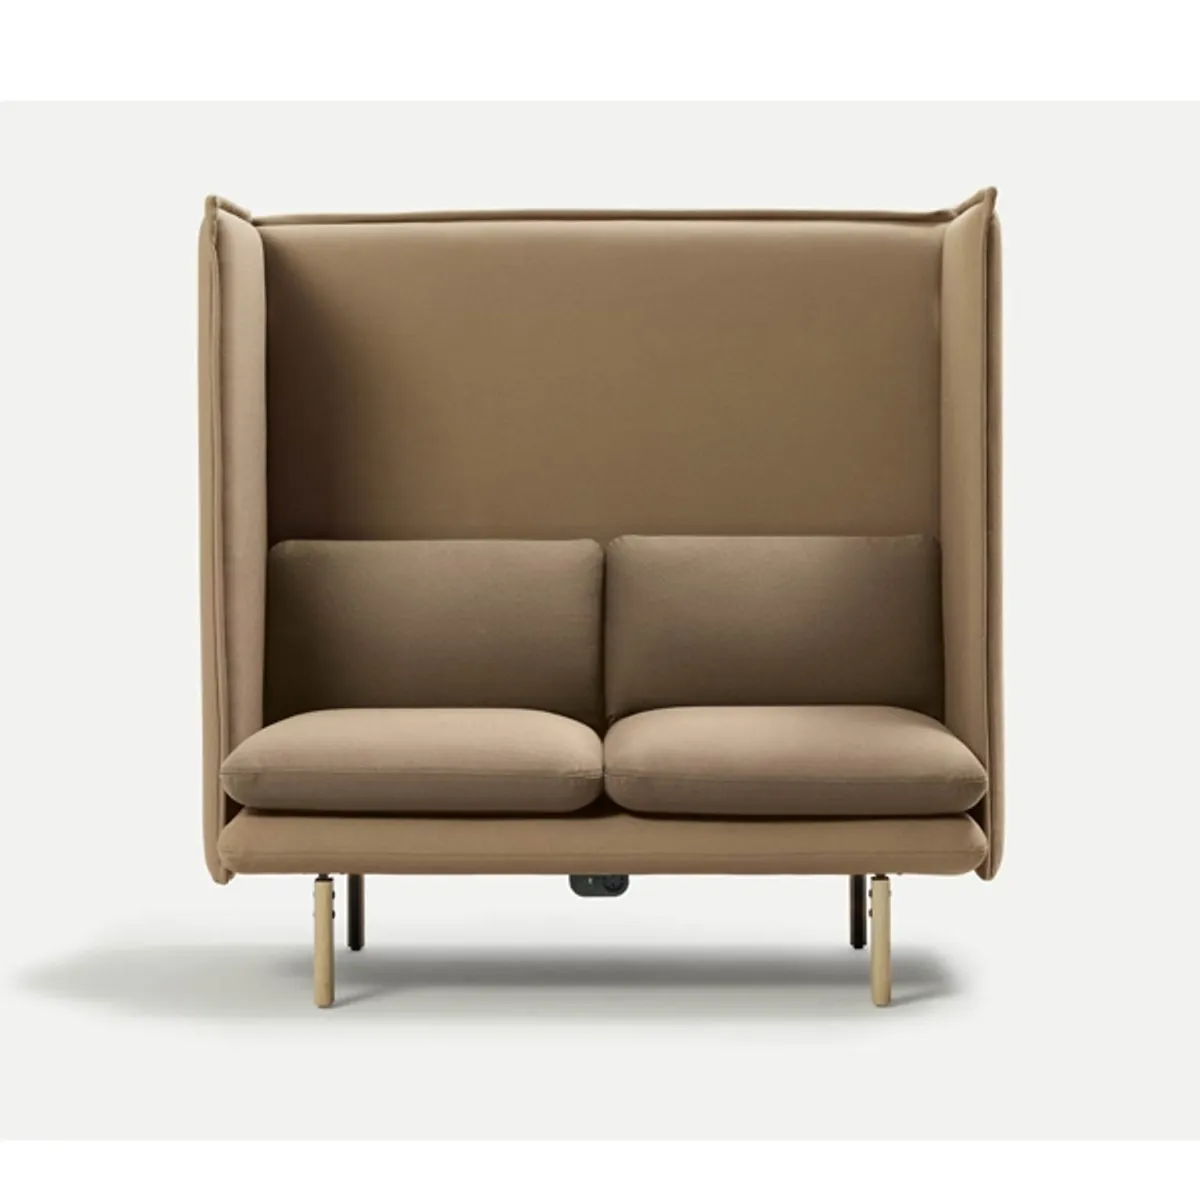 Rew sofa Inside Out Contracts8